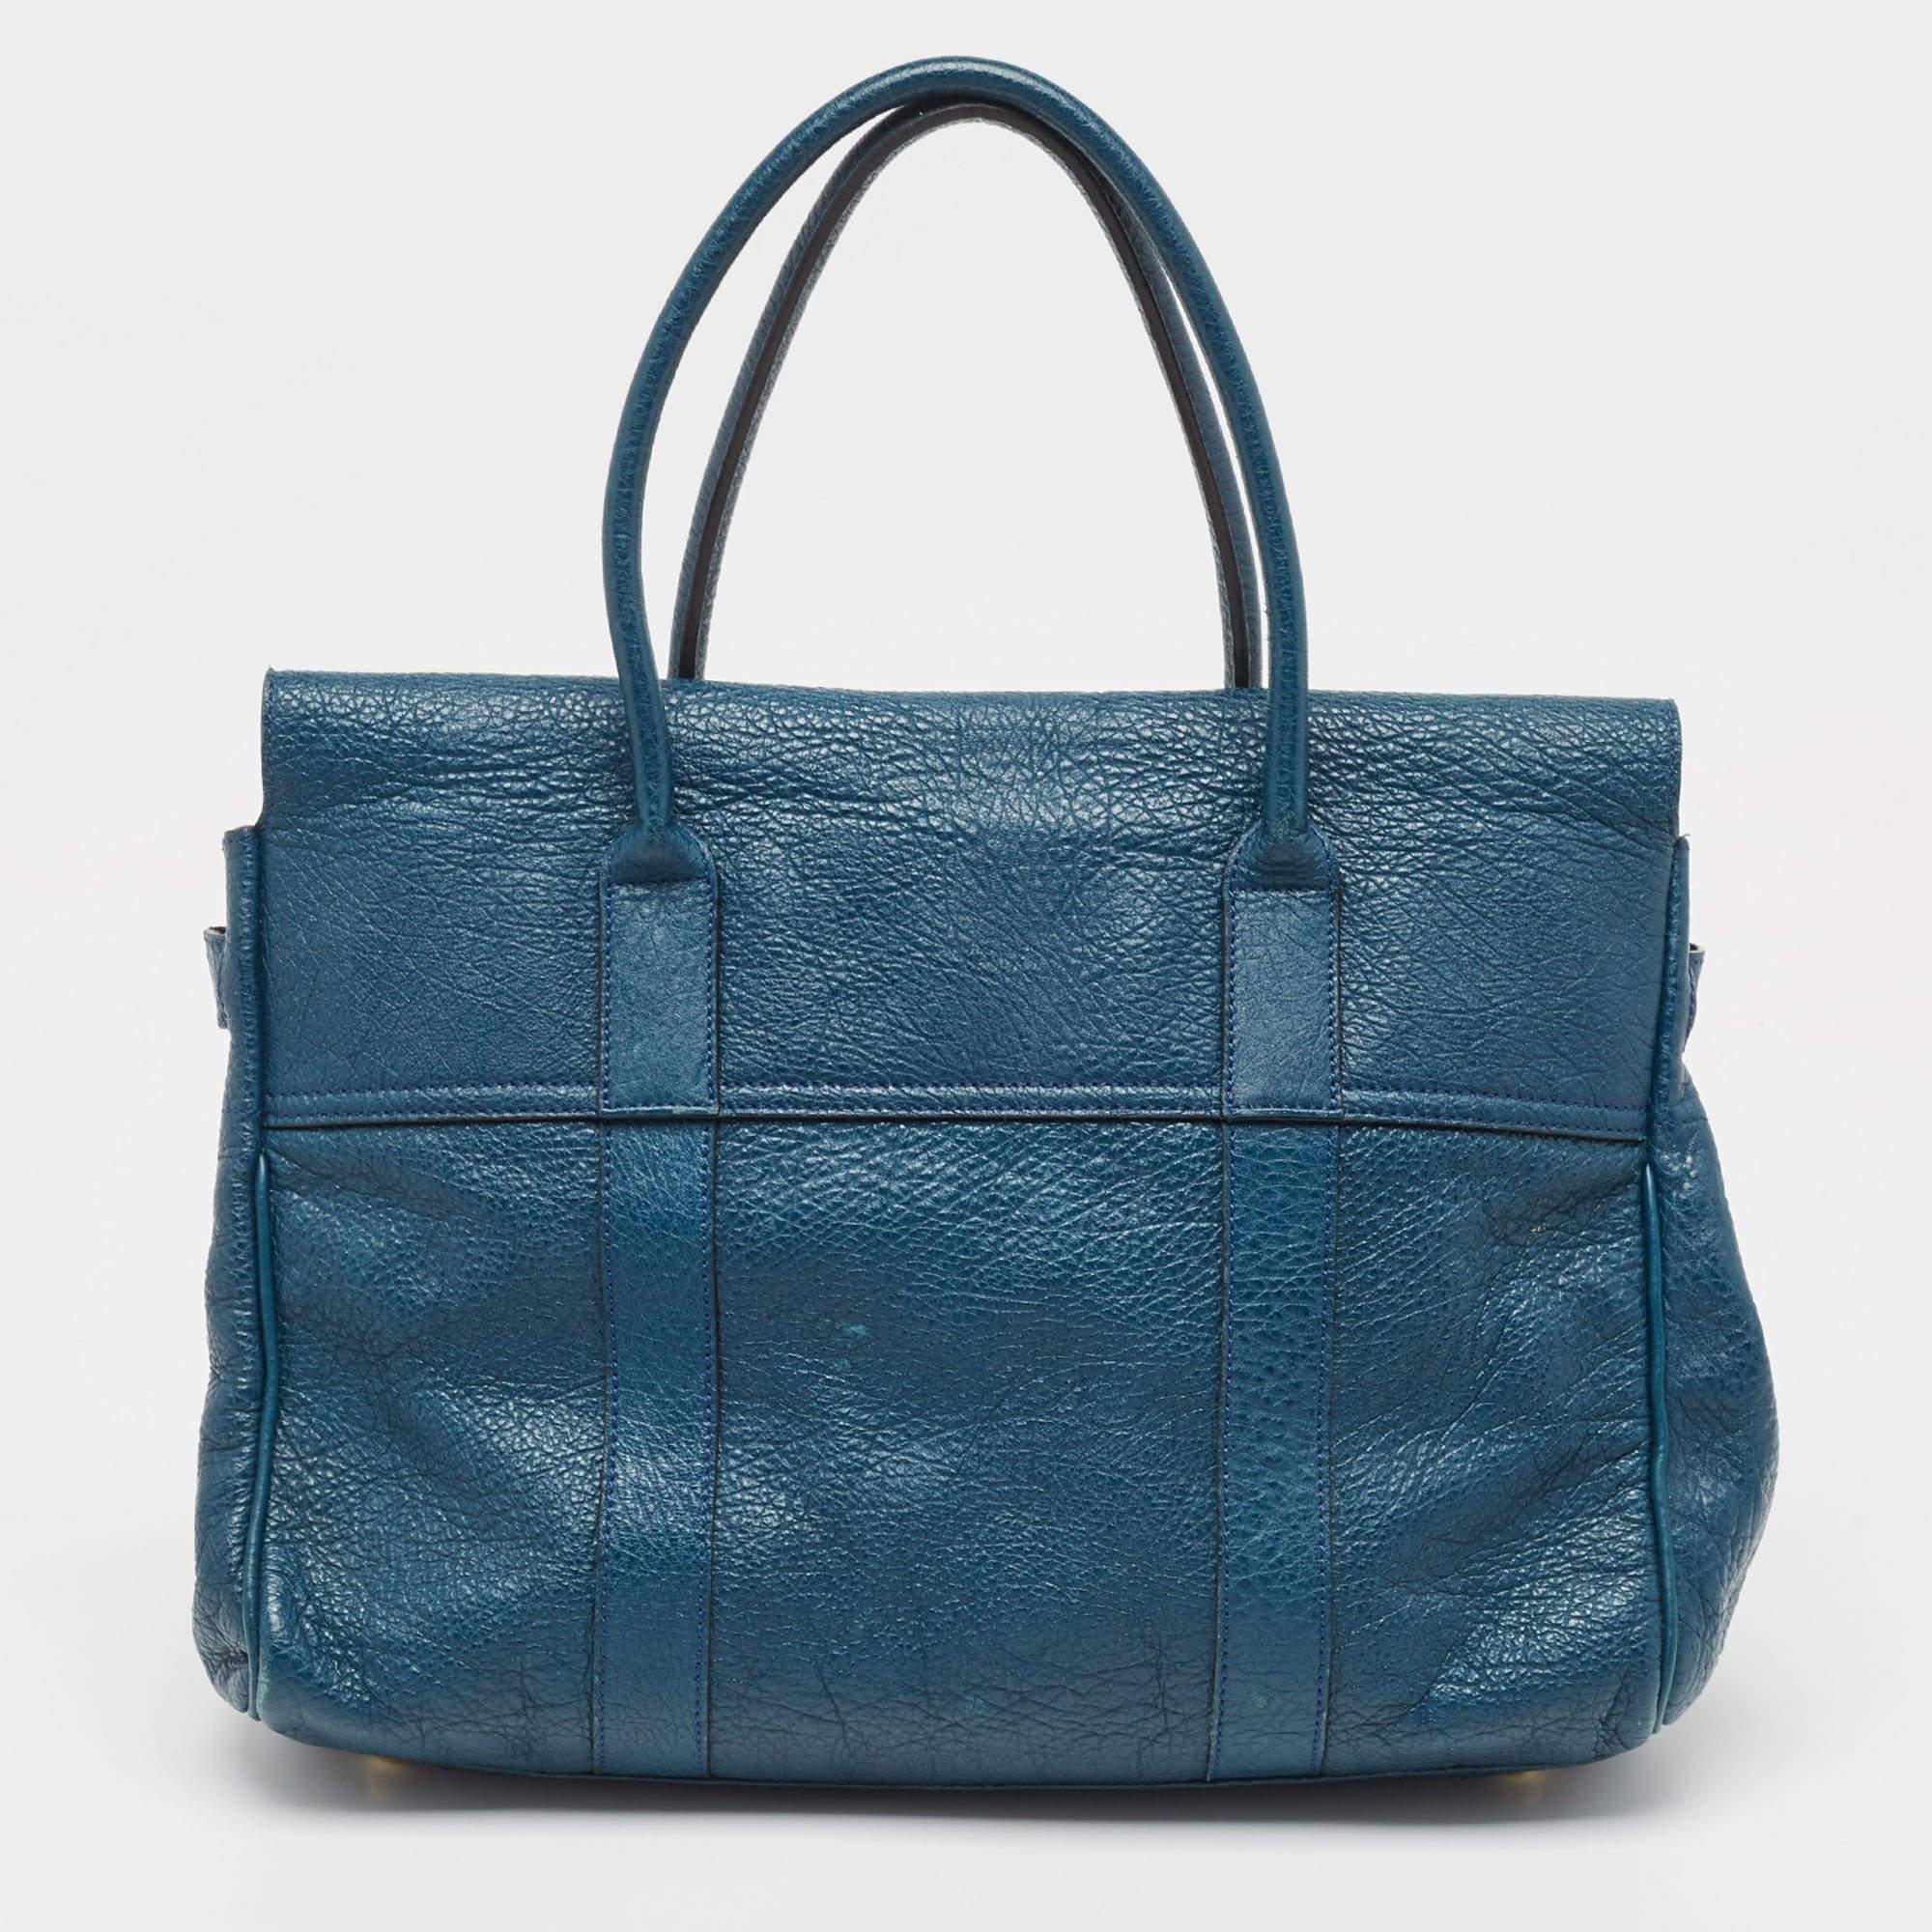 The Bayswater is one of the most well-known collections from Mulberry, so it's fair to say that this satchel is worth the buy. Crafted from leather, the bag is equipped with two handles and a turn lock on the flap securing a capacious compartment